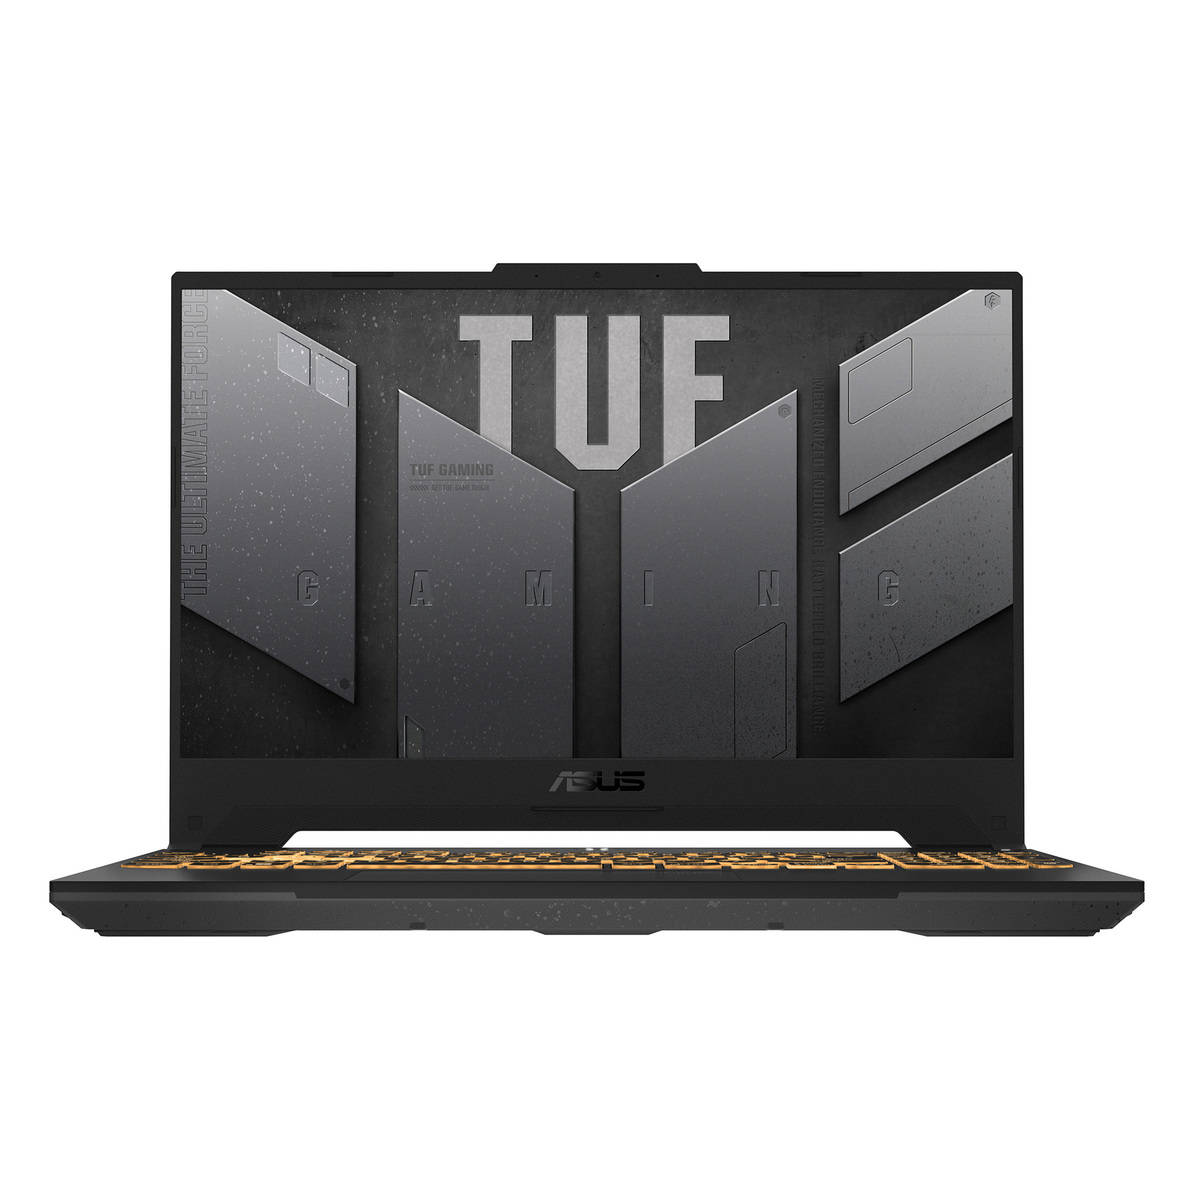 Asus TUF F15 Gaming Laptop, 15.6 Inches, Intel Core i7-12700H